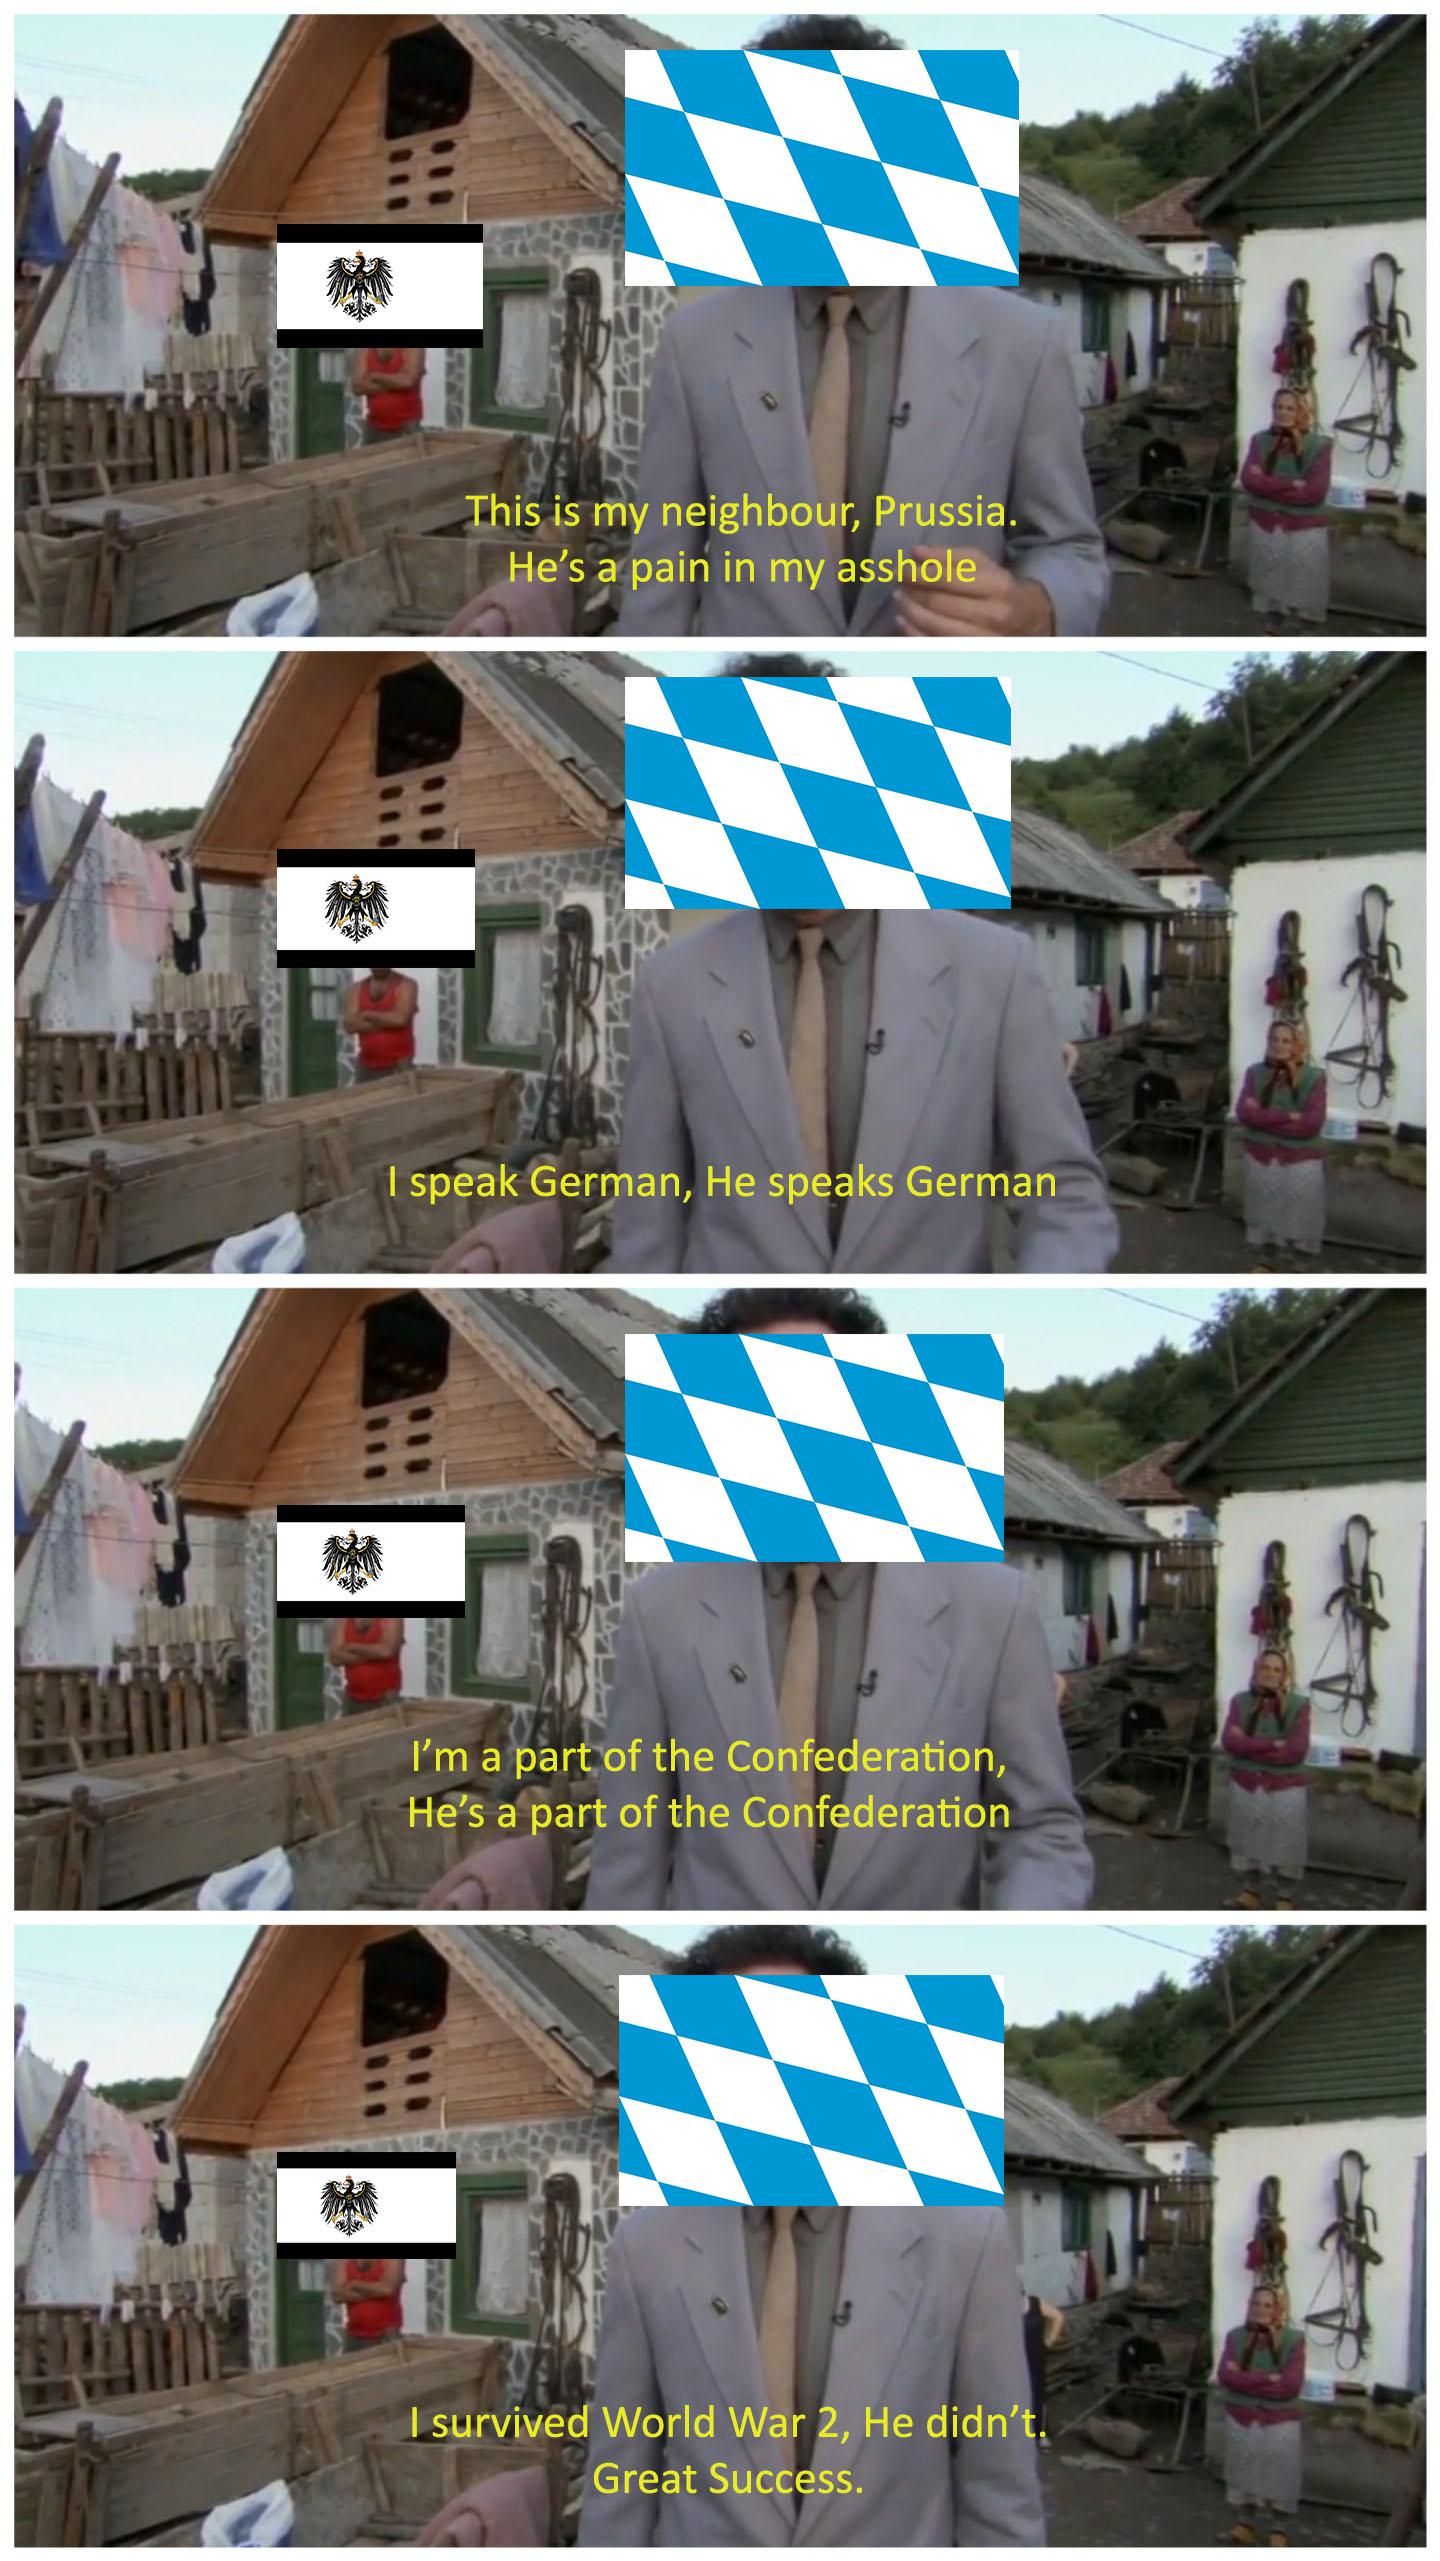 The Bavarian-Prussian rivalry